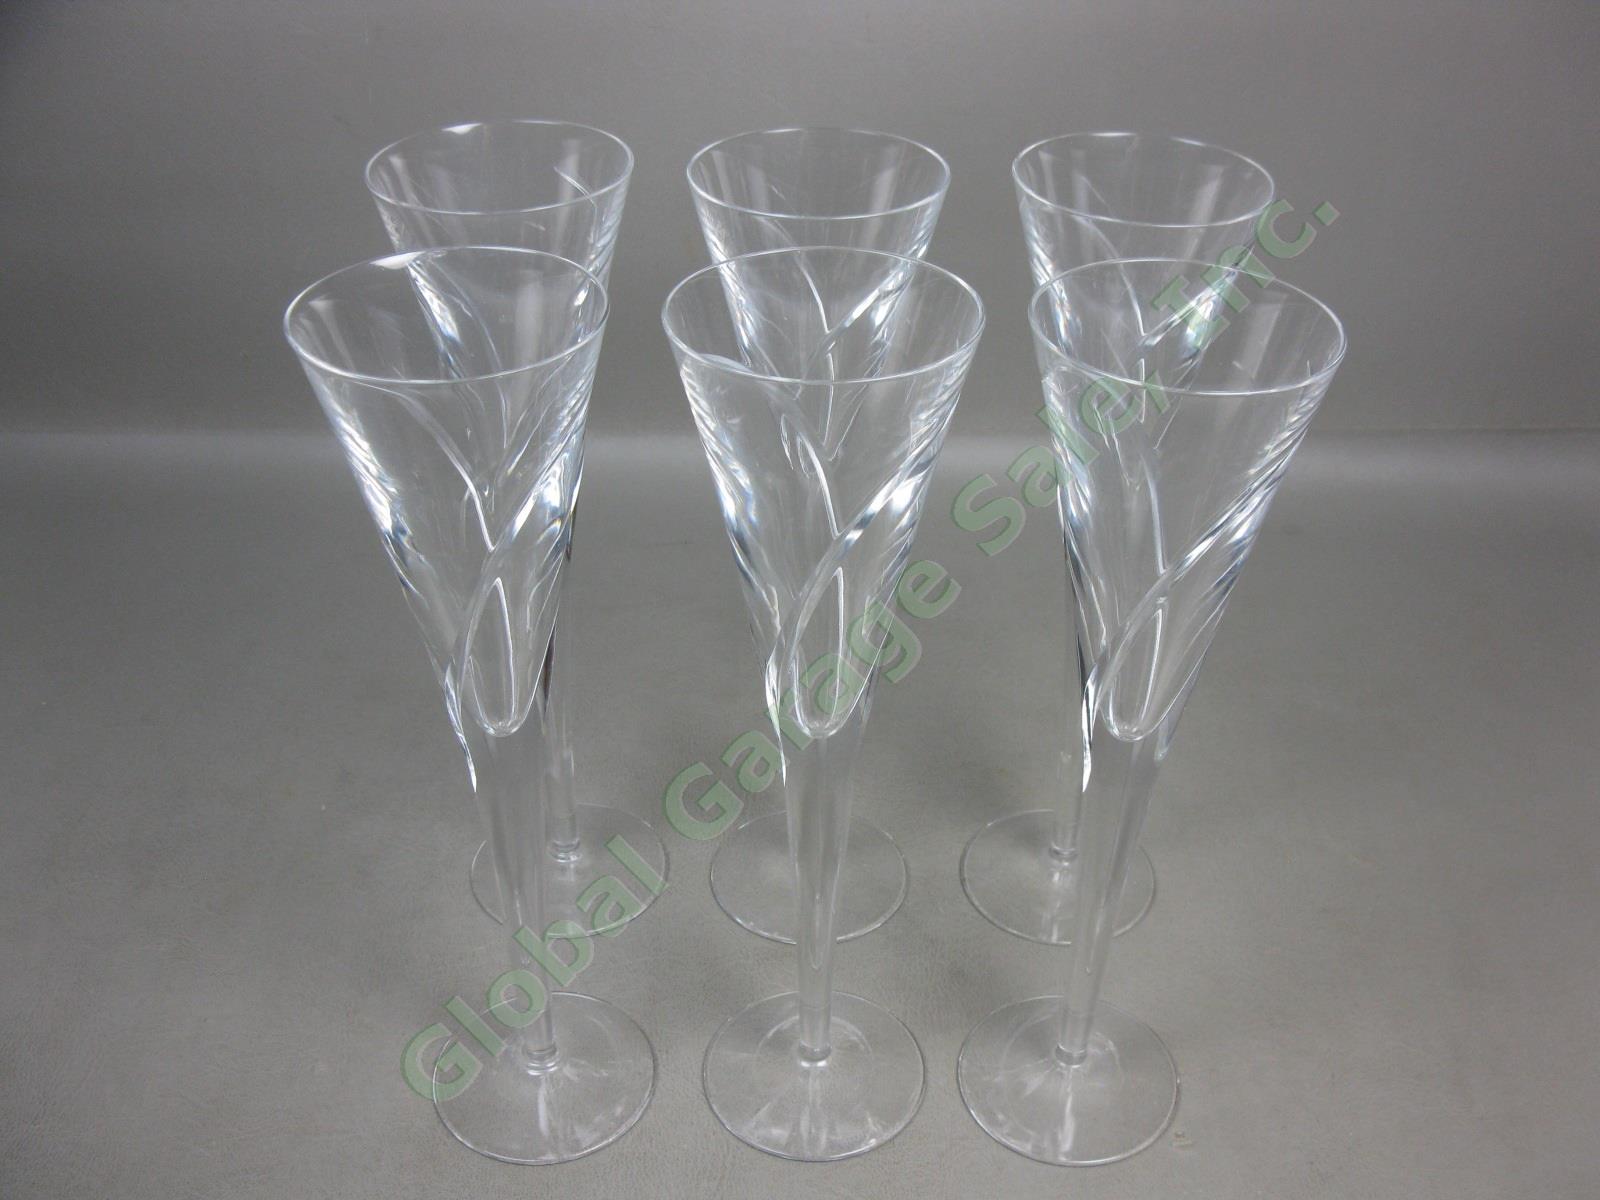 6 Waterford Cut Lead Crystal Siren Champagne Toasting Flute Glasses Set Lot 11"